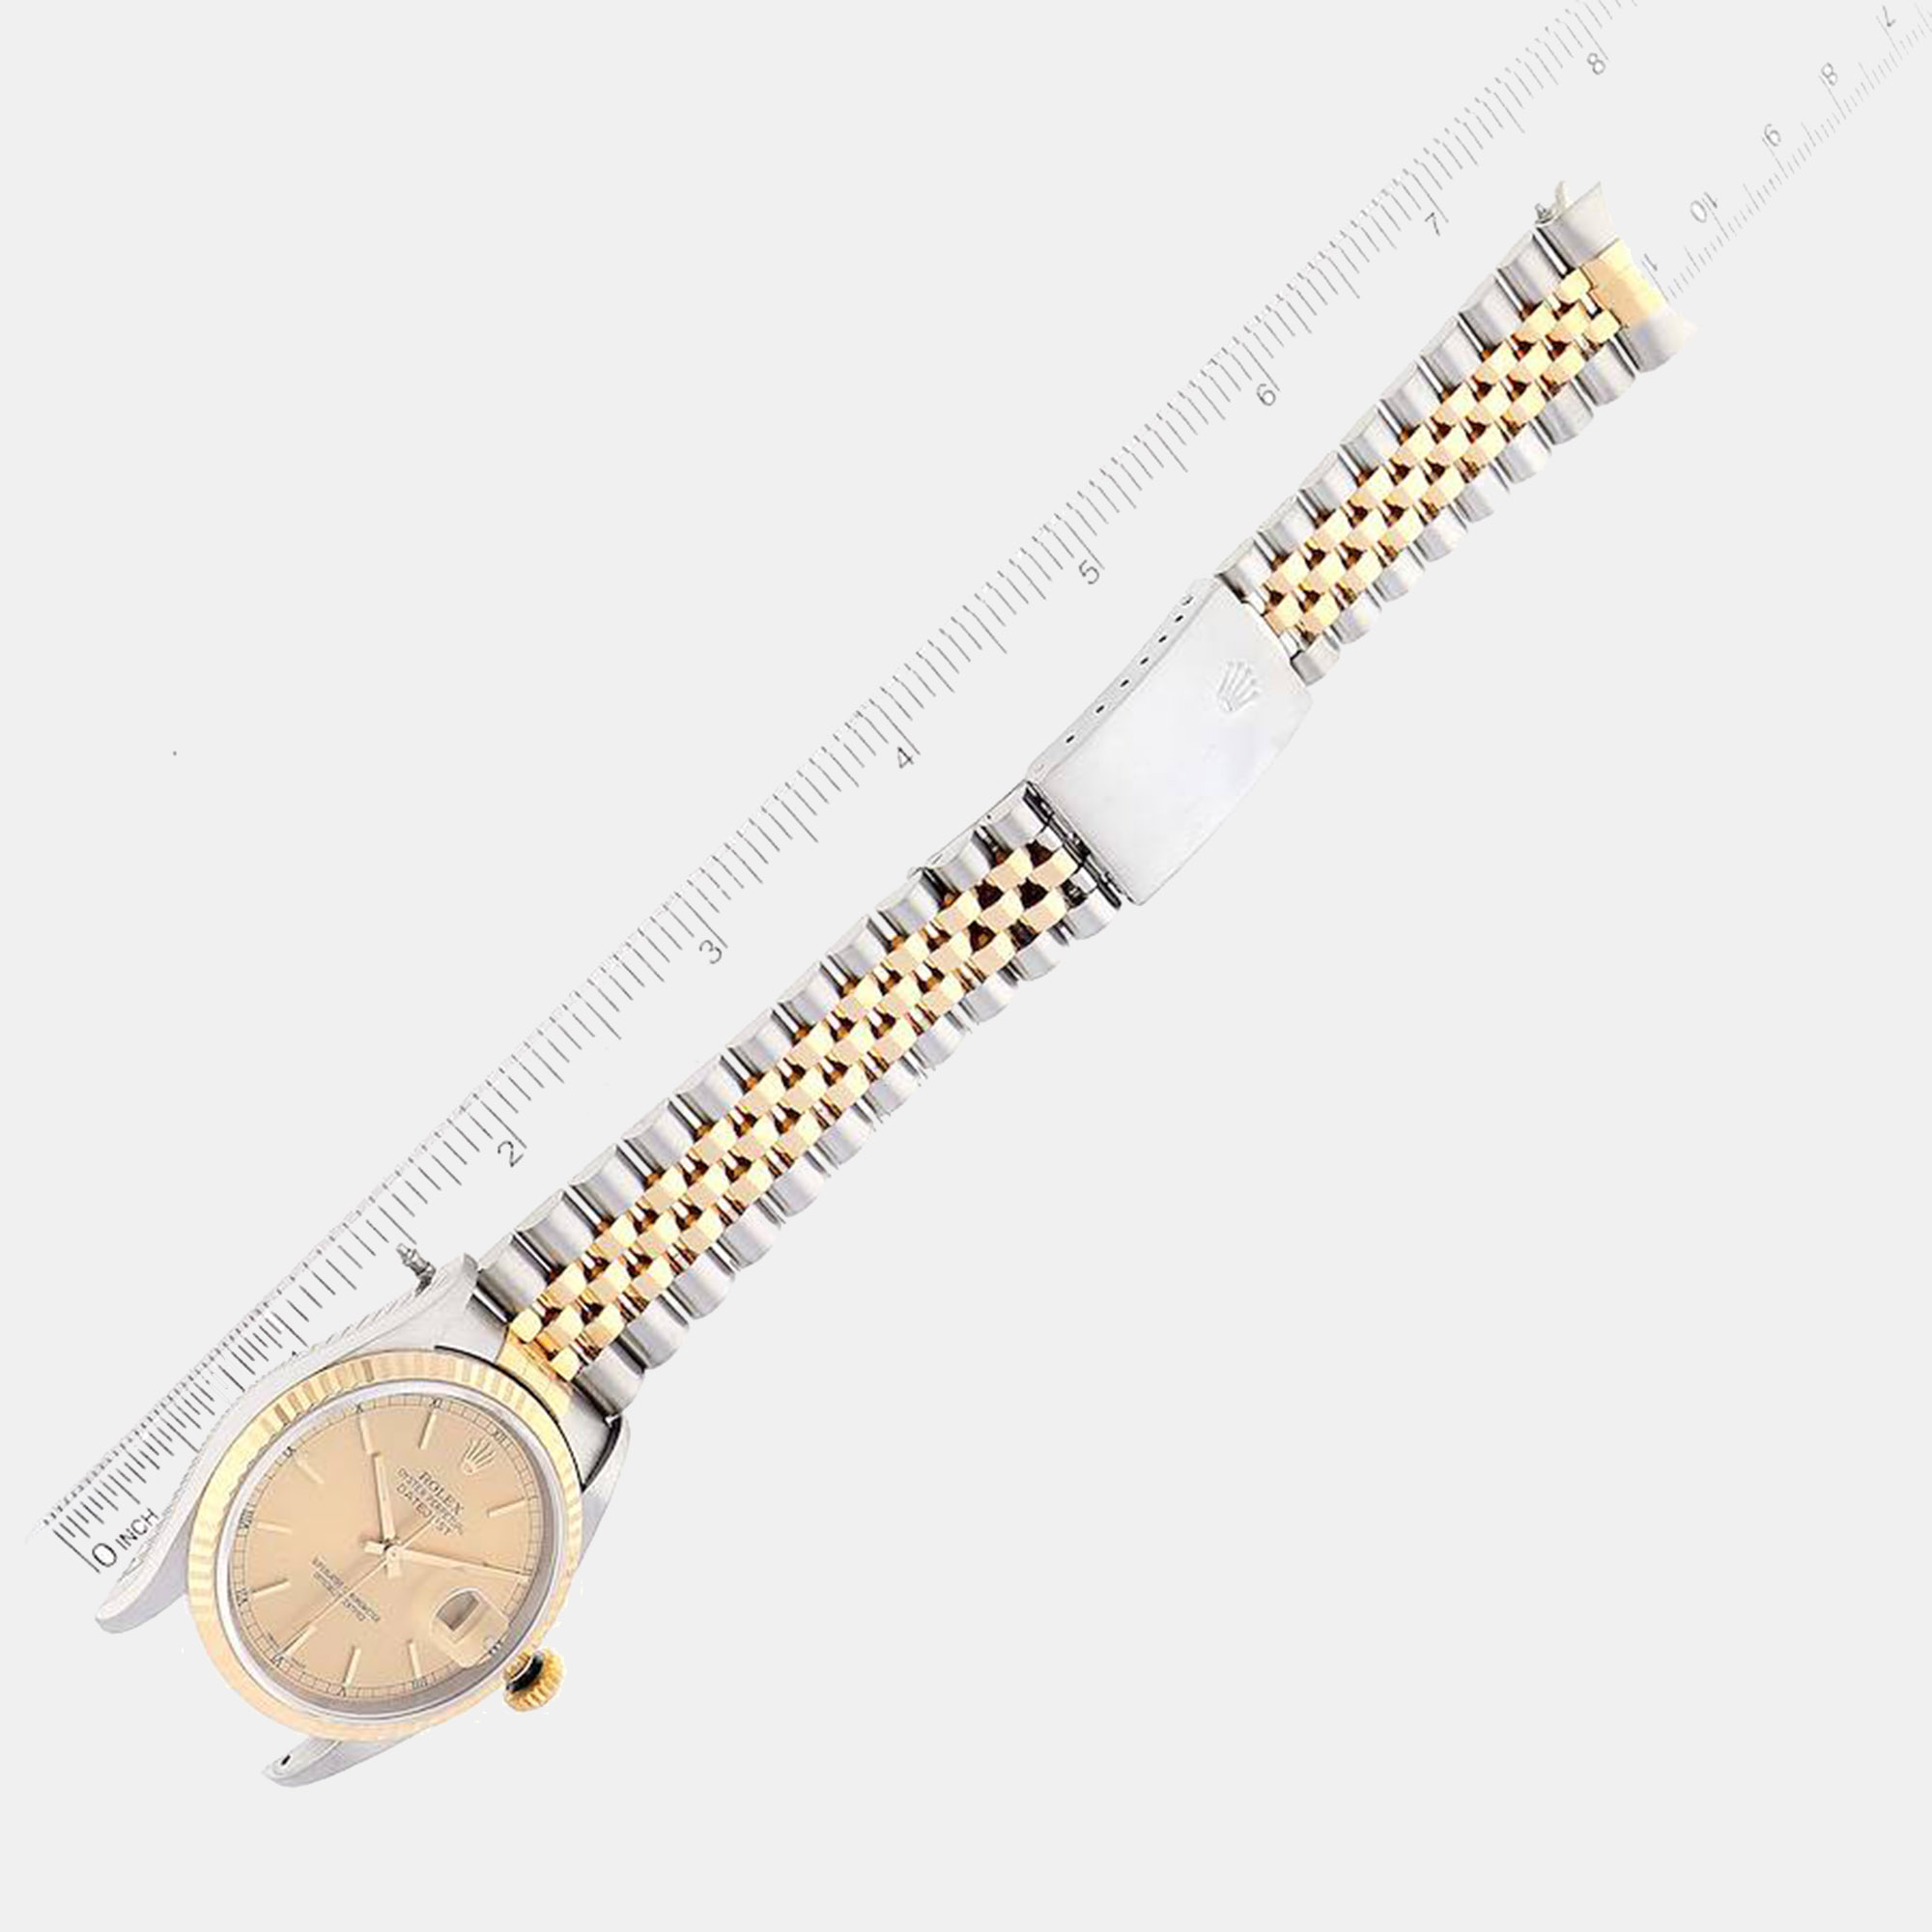 Rolex Datejust Champagne Dial Steel Yellow Gold Men's Watch 16233 36 Mm